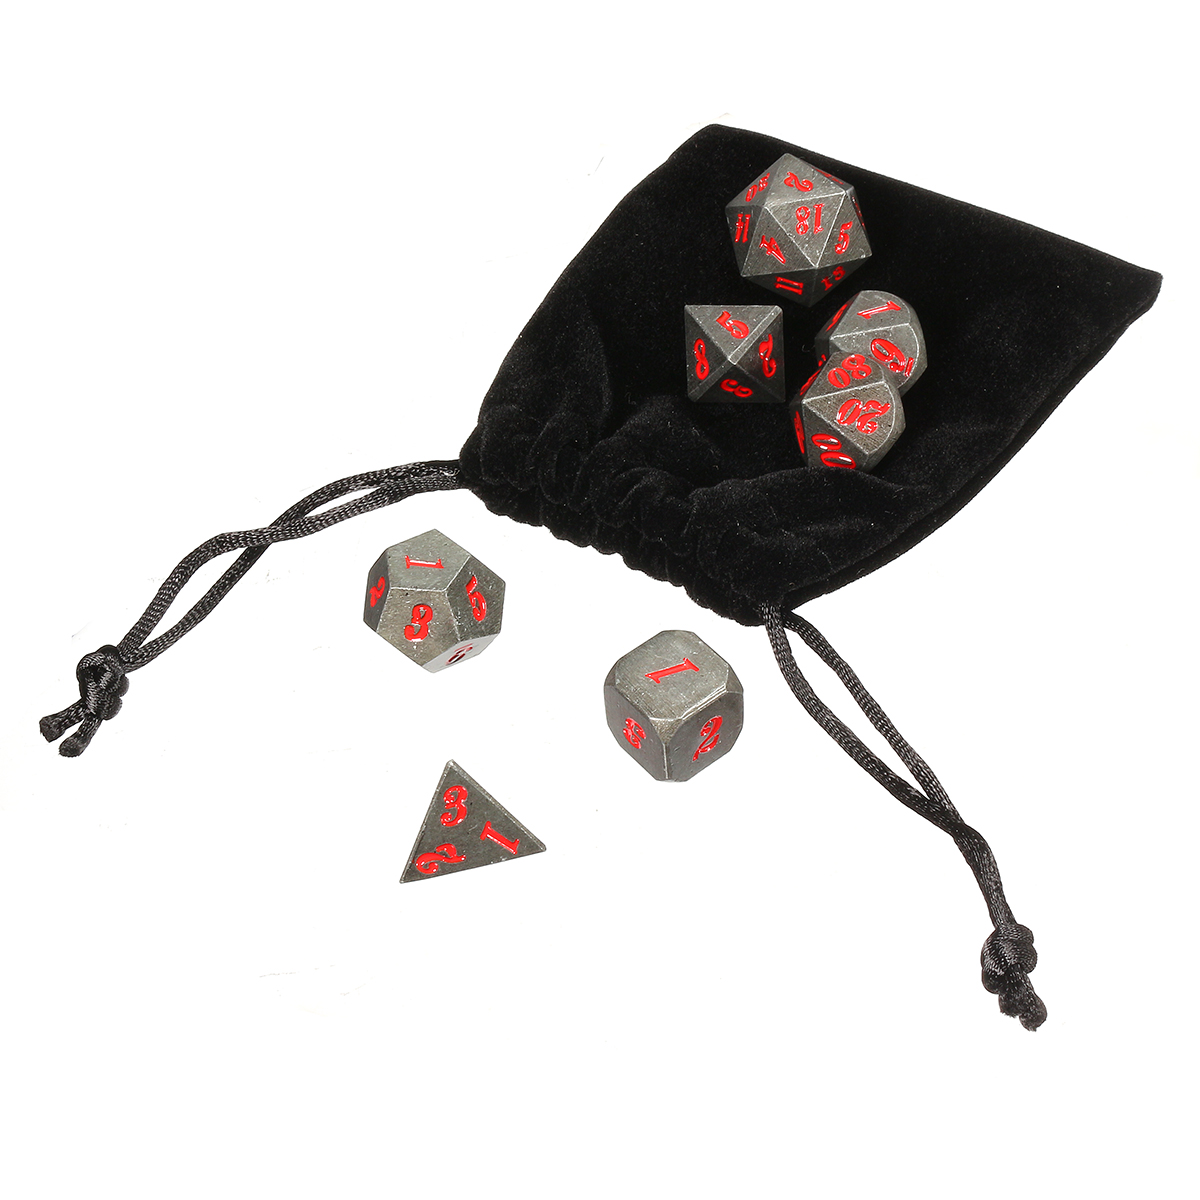 Antique-Metal-7-Pcs-Multisided-Dice-Heavy-Metal-Polyhedral-Dices-Set-w-Bag-1292360-8